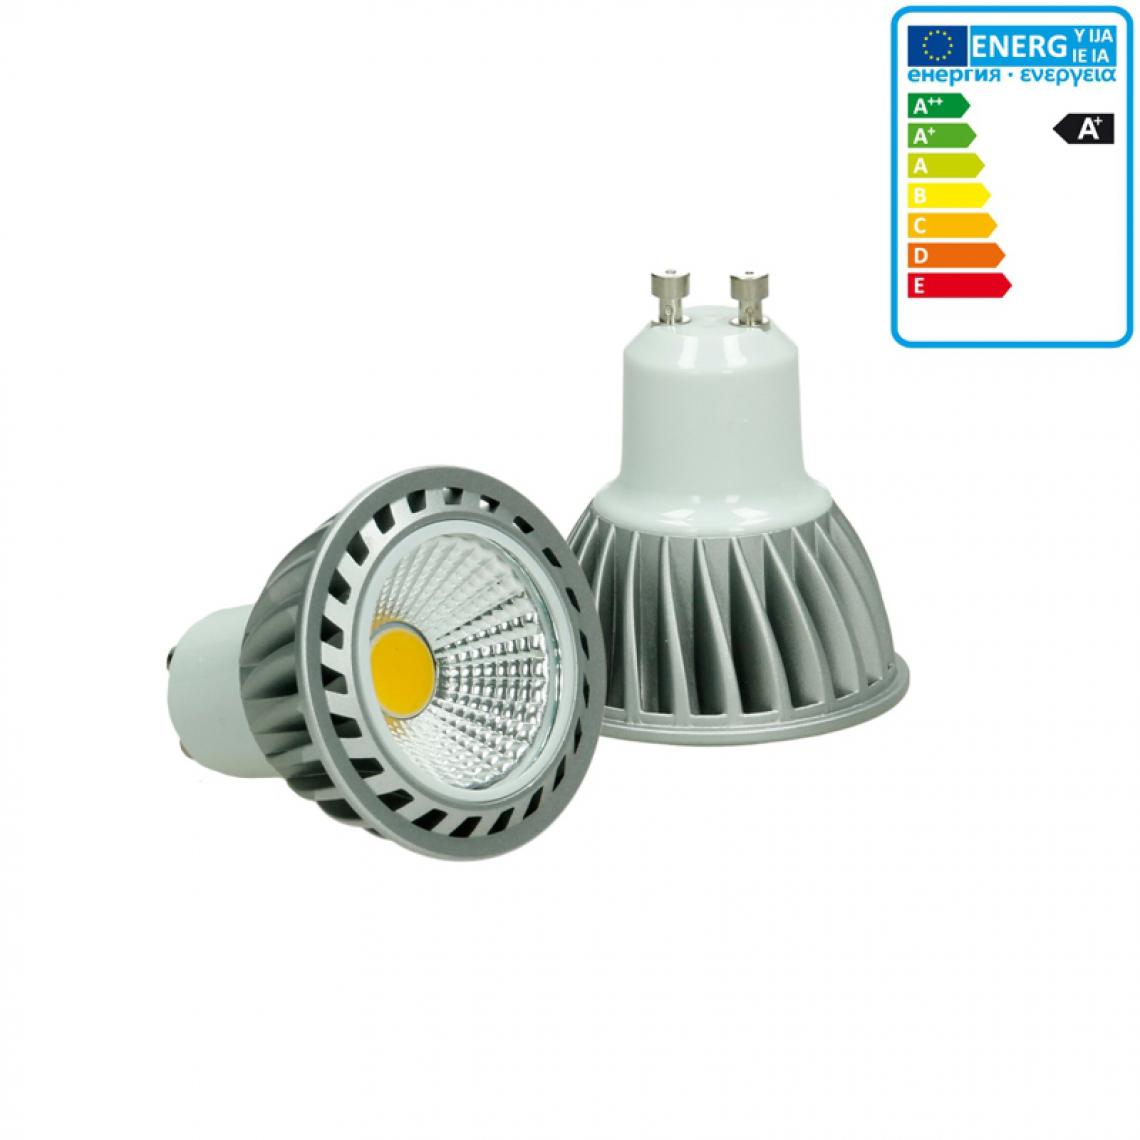 Ecd Germany - ECD Germany LED COB GU10 Ampoule Lampe Spot Dimmable 4W Blanc Froid - Ampoules LED